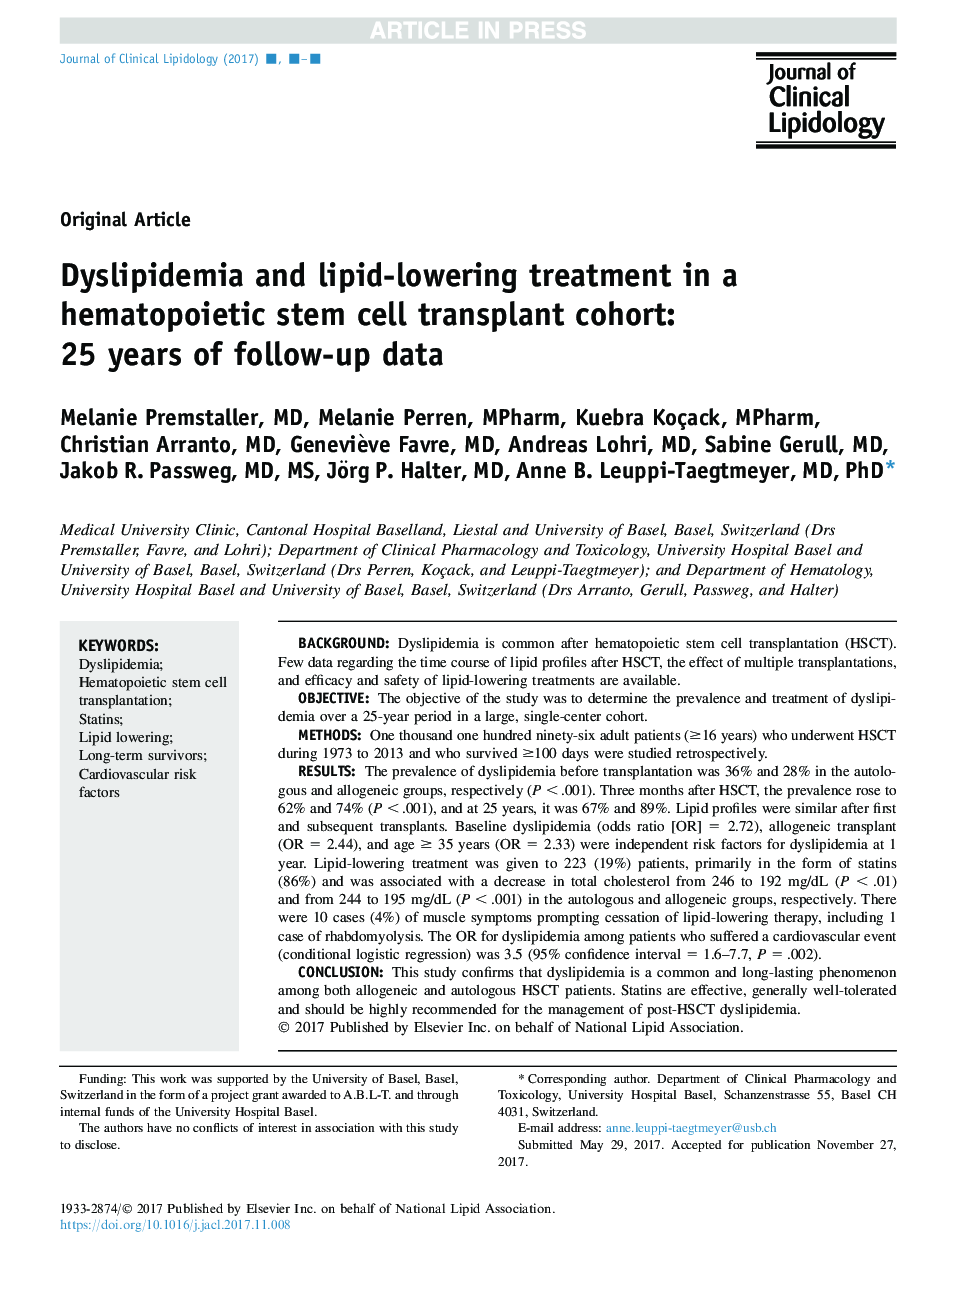 Dyslipidemia and lipid-lowering treatment in a hematopoietic stem cell transplant cohort: 25Â years of follow-up data